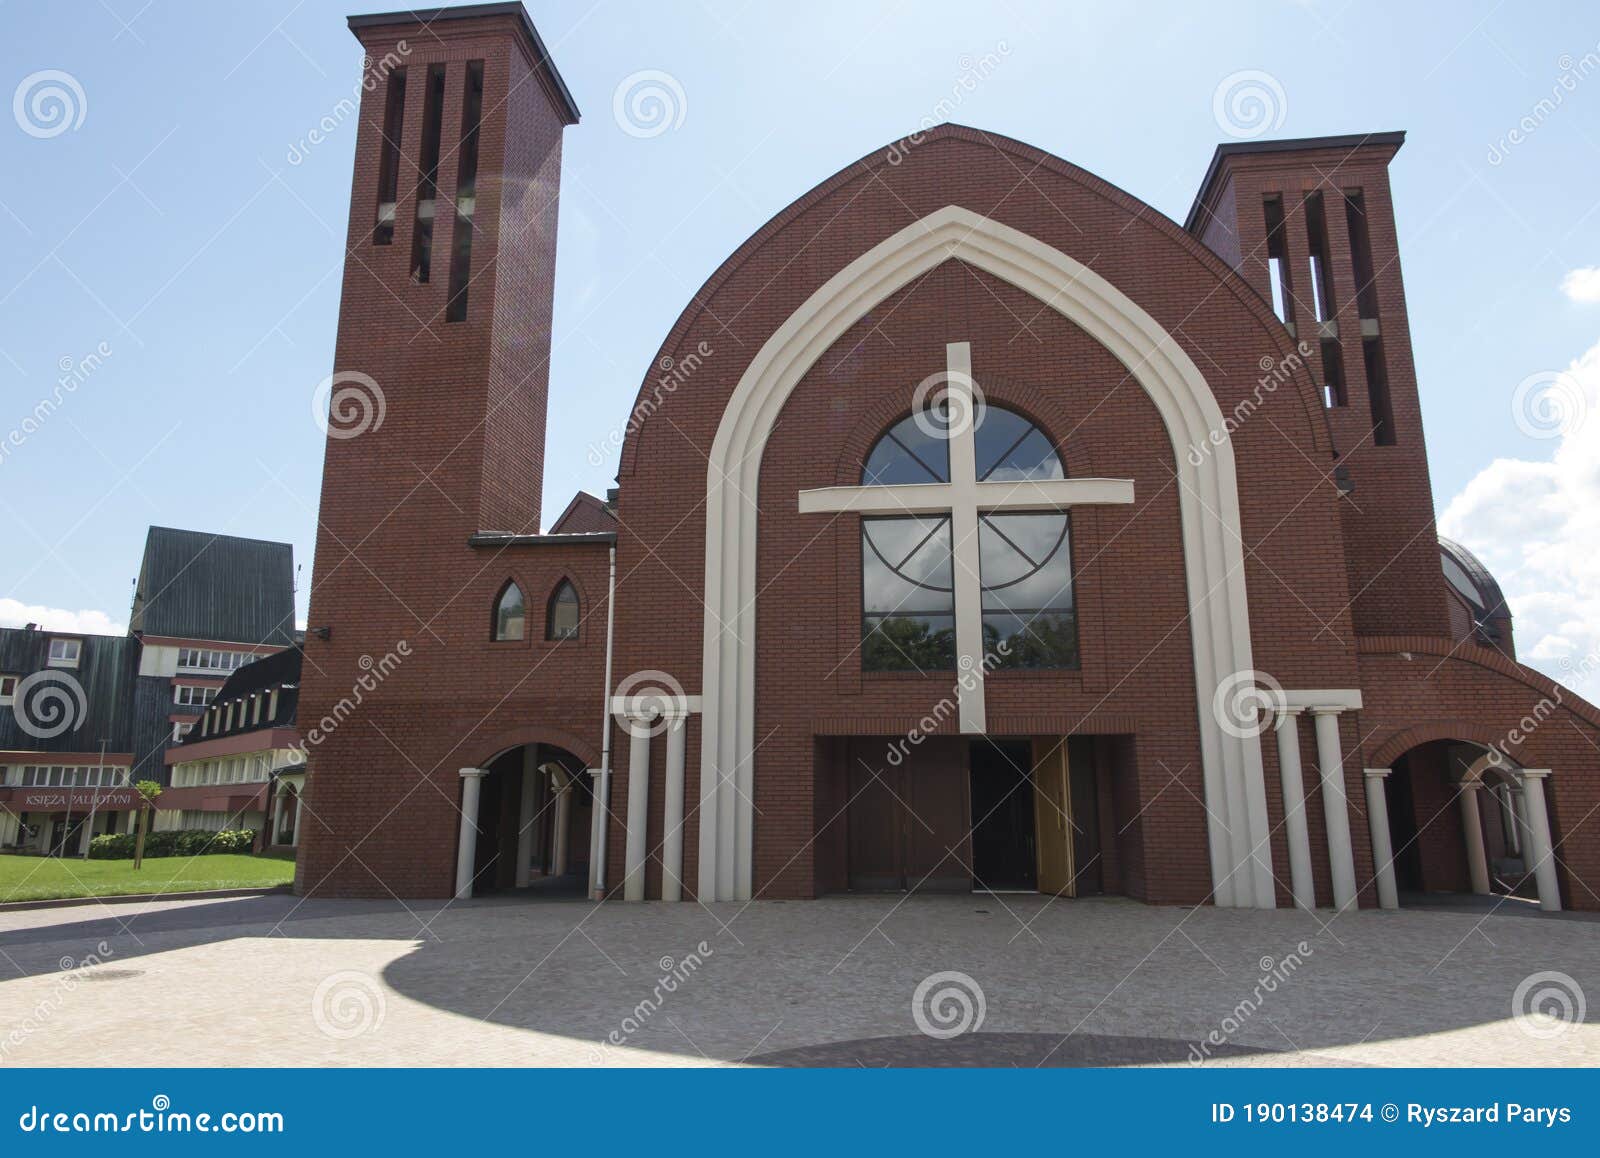 new church building at shrine of divine mercy in the valley of divine mercy at the pallottine priests in czestochowa